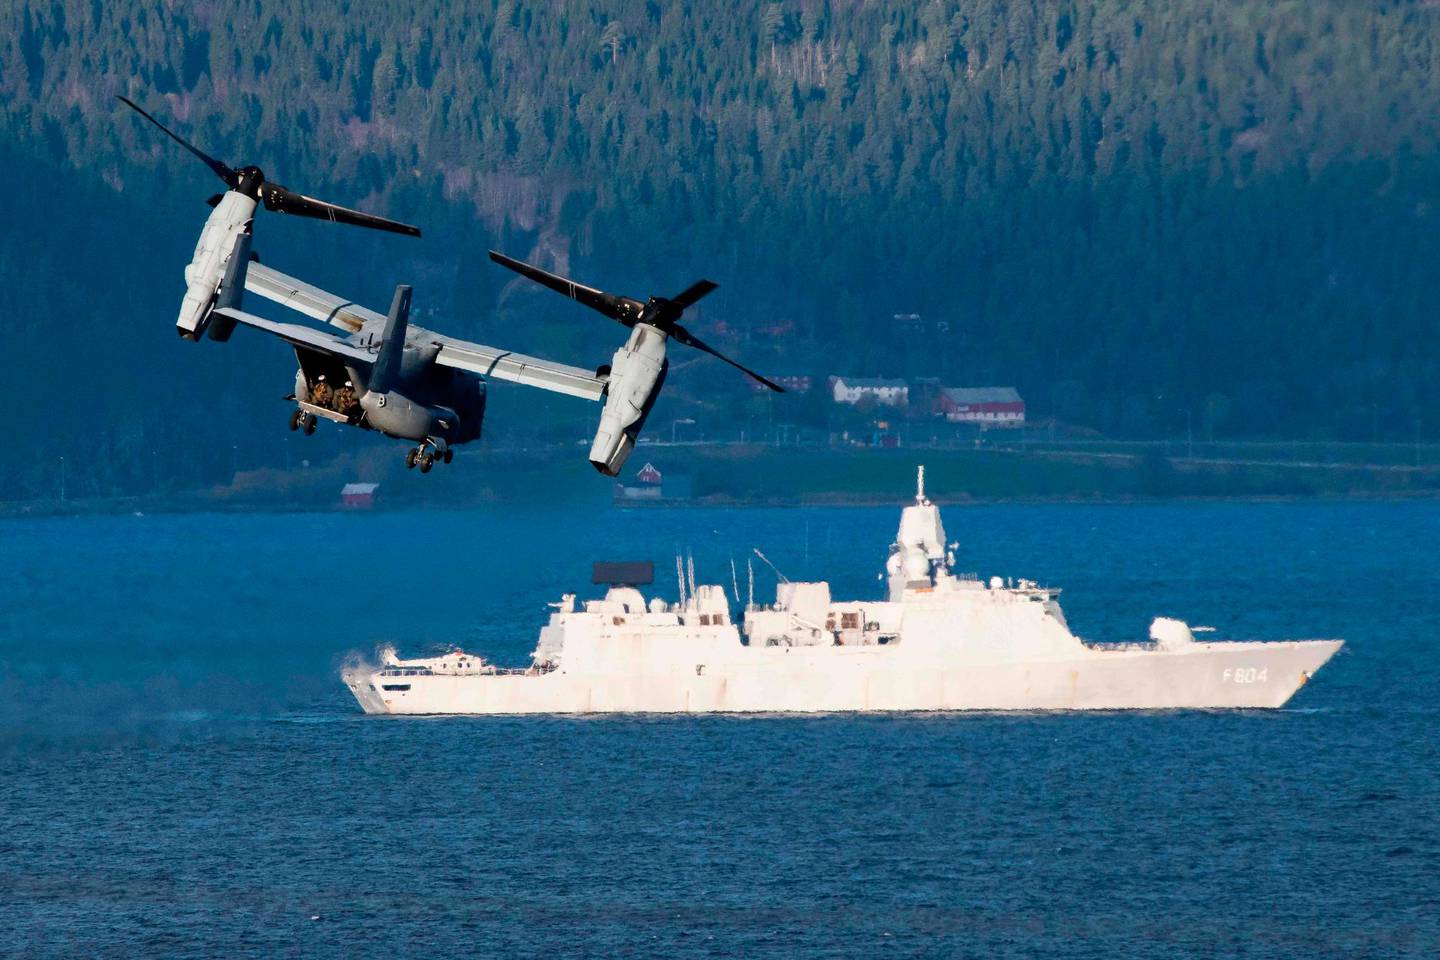 The United States' V-22 Osprey, a multi-mission, tiltrotor military aircraft with both vertical takeoff and landing, flies during a joint demonstration as part of the NATO Trident Juncture 2018 exercise in Byneset near Trondheim, Norway, October 30, 2018. - Trident Juncture 2018, is a NATO-led military exercise held in Norway from 25 October to 7 November 2018. The exercise is the largest of its kind in Norway since the 1980s. Around 50,000 participants from NATO and partner countries, some 250 aircraft, 65 ships and up to 10,000 vehicles take part in the exercise. The main goal of Trident Juncture is allegedly to train the NATO Response Force and to test the alliance's defence capability. (Photo by Jonathan NACKSTRAND / AFP)